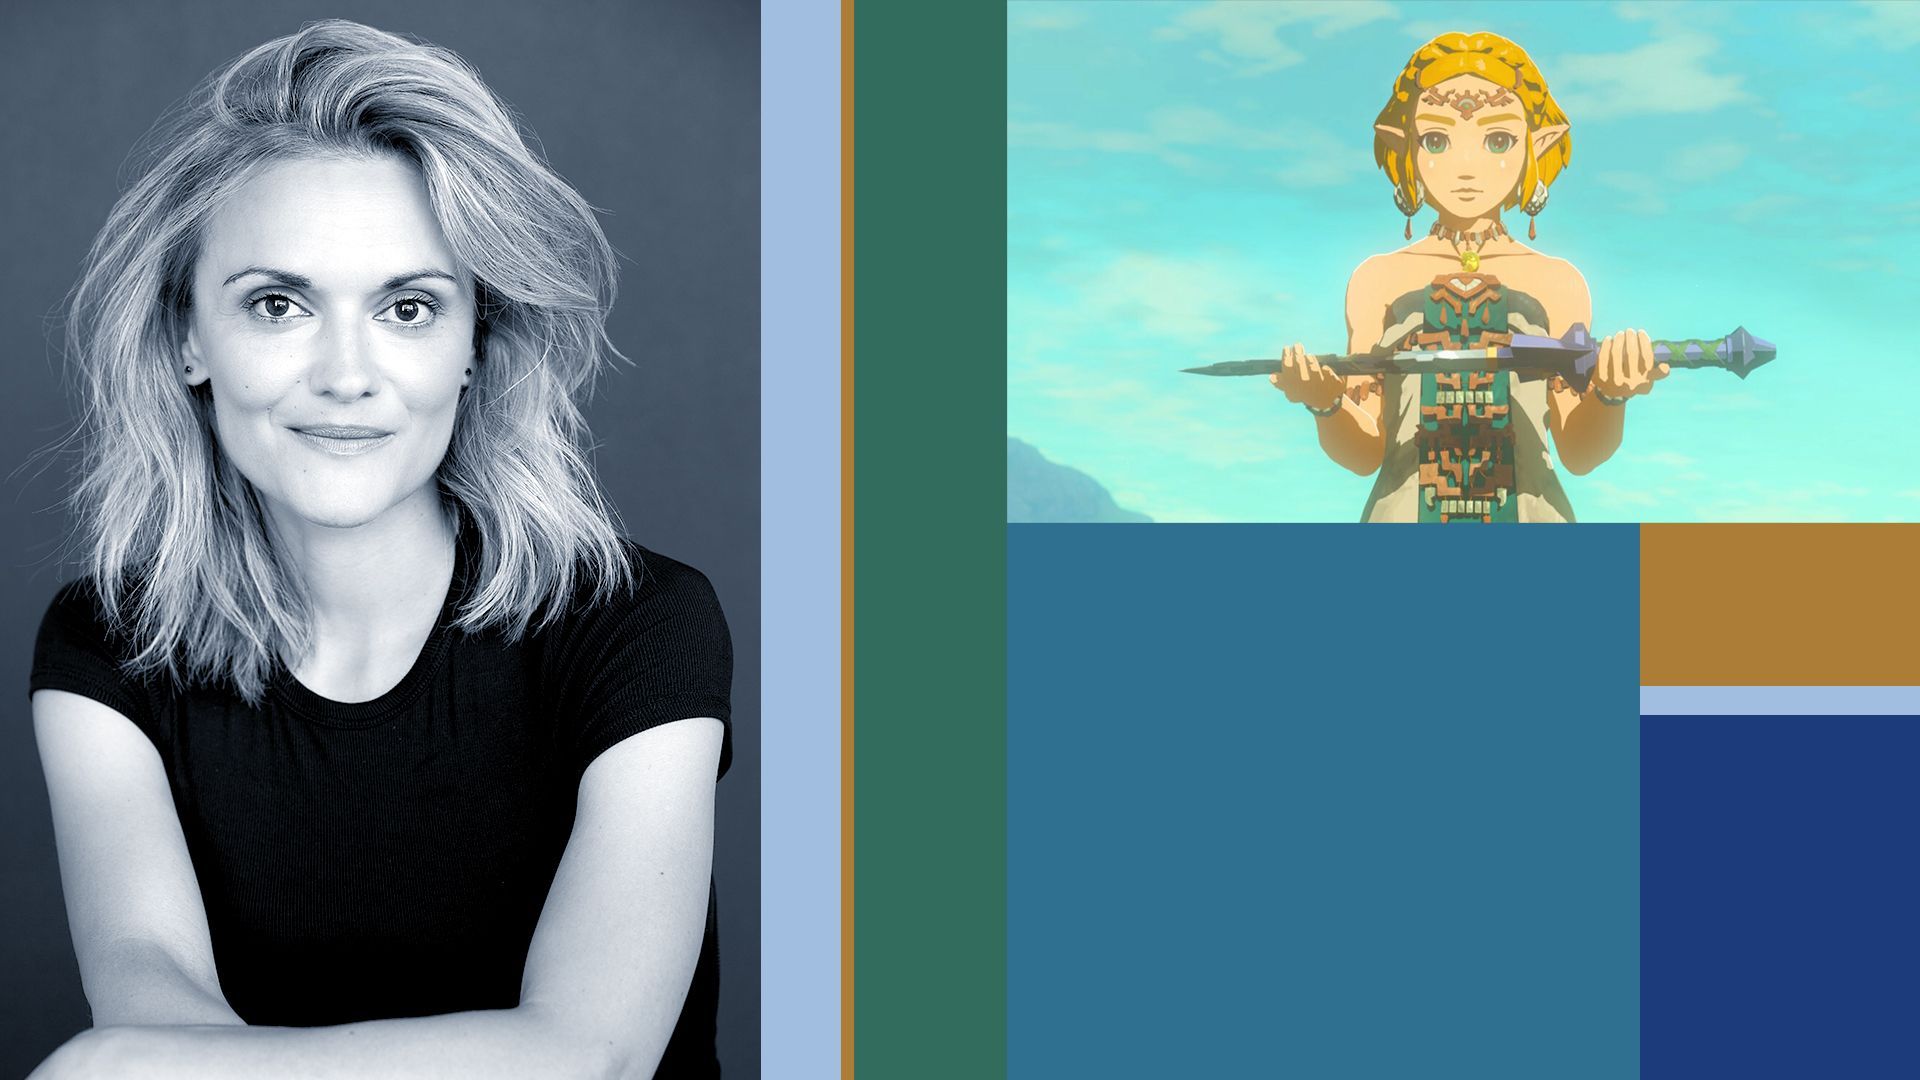 Photo illustration of Patricia Summersett with a screenshot of Zelda and rectangles.